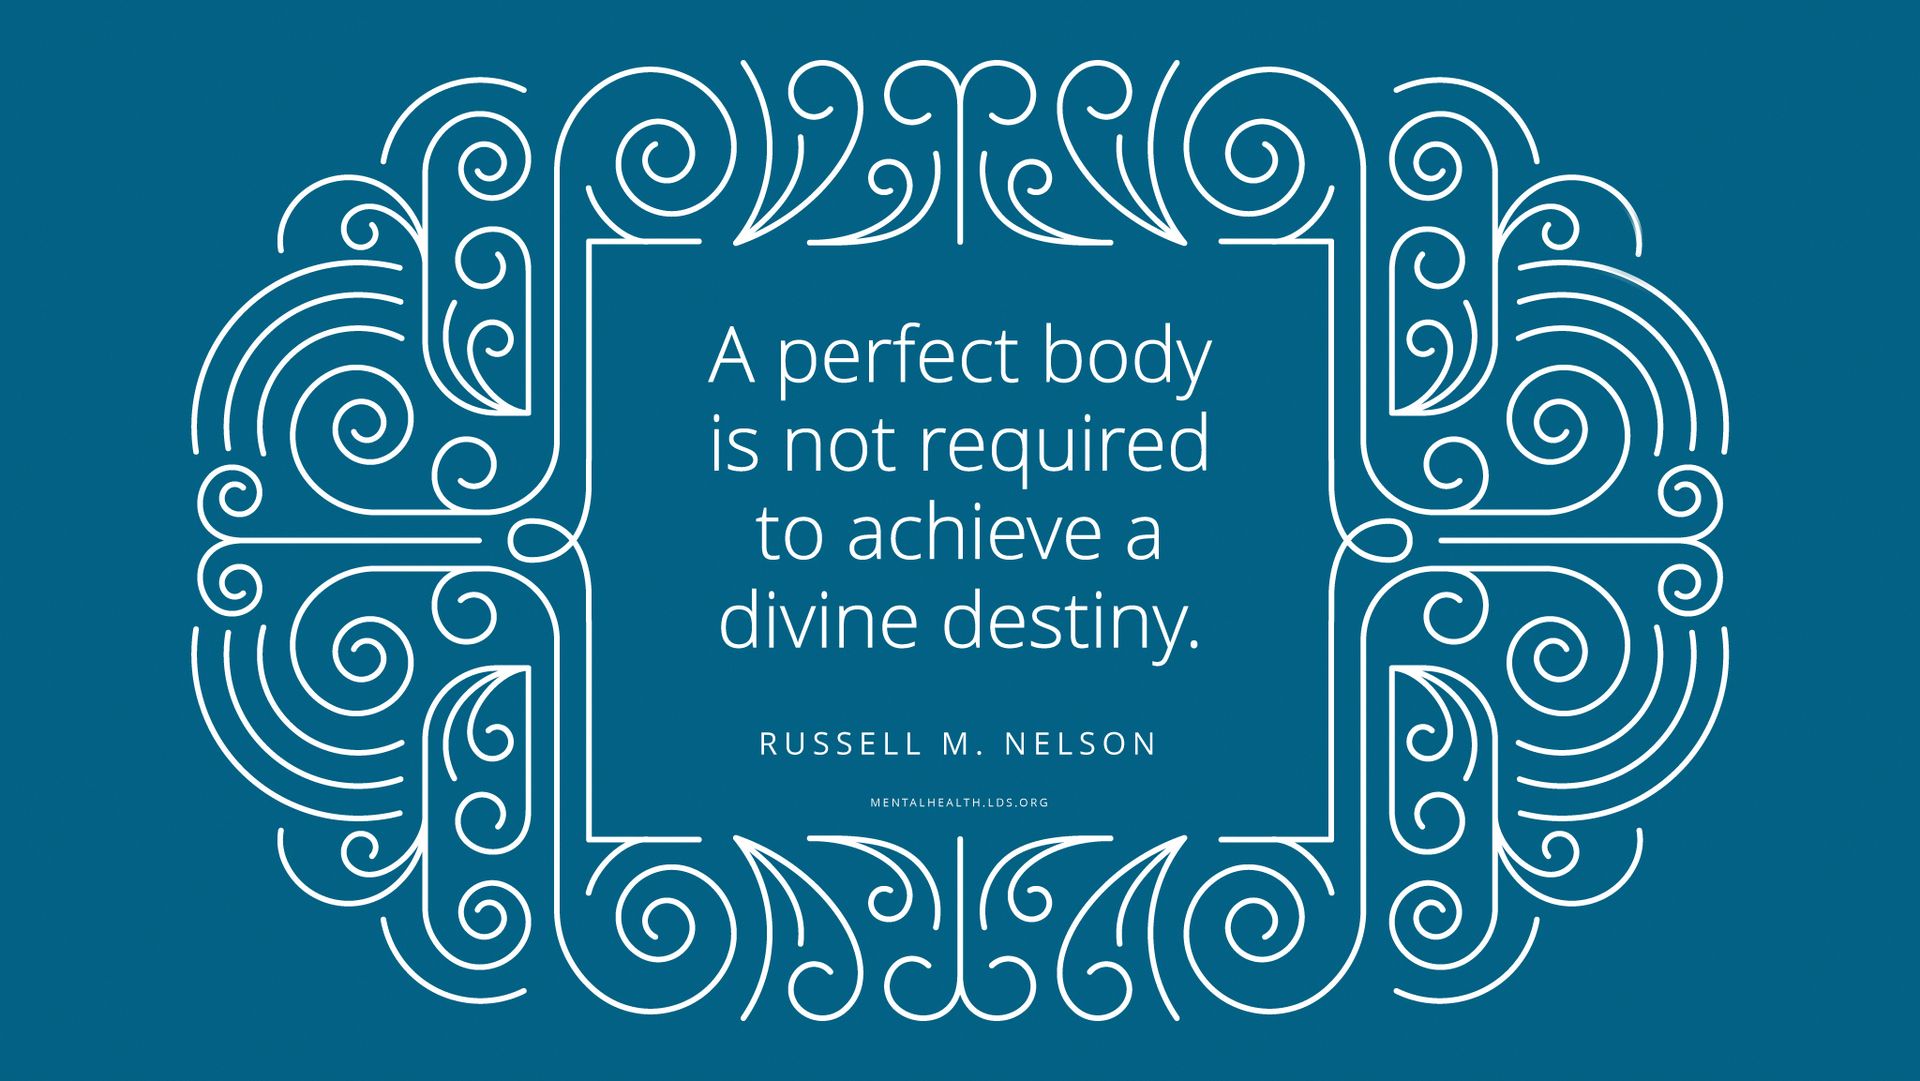 “A perfect body is not required to achieve a divine destiny.”—Elder Russell M. Nelson, “Thanks Be to God”